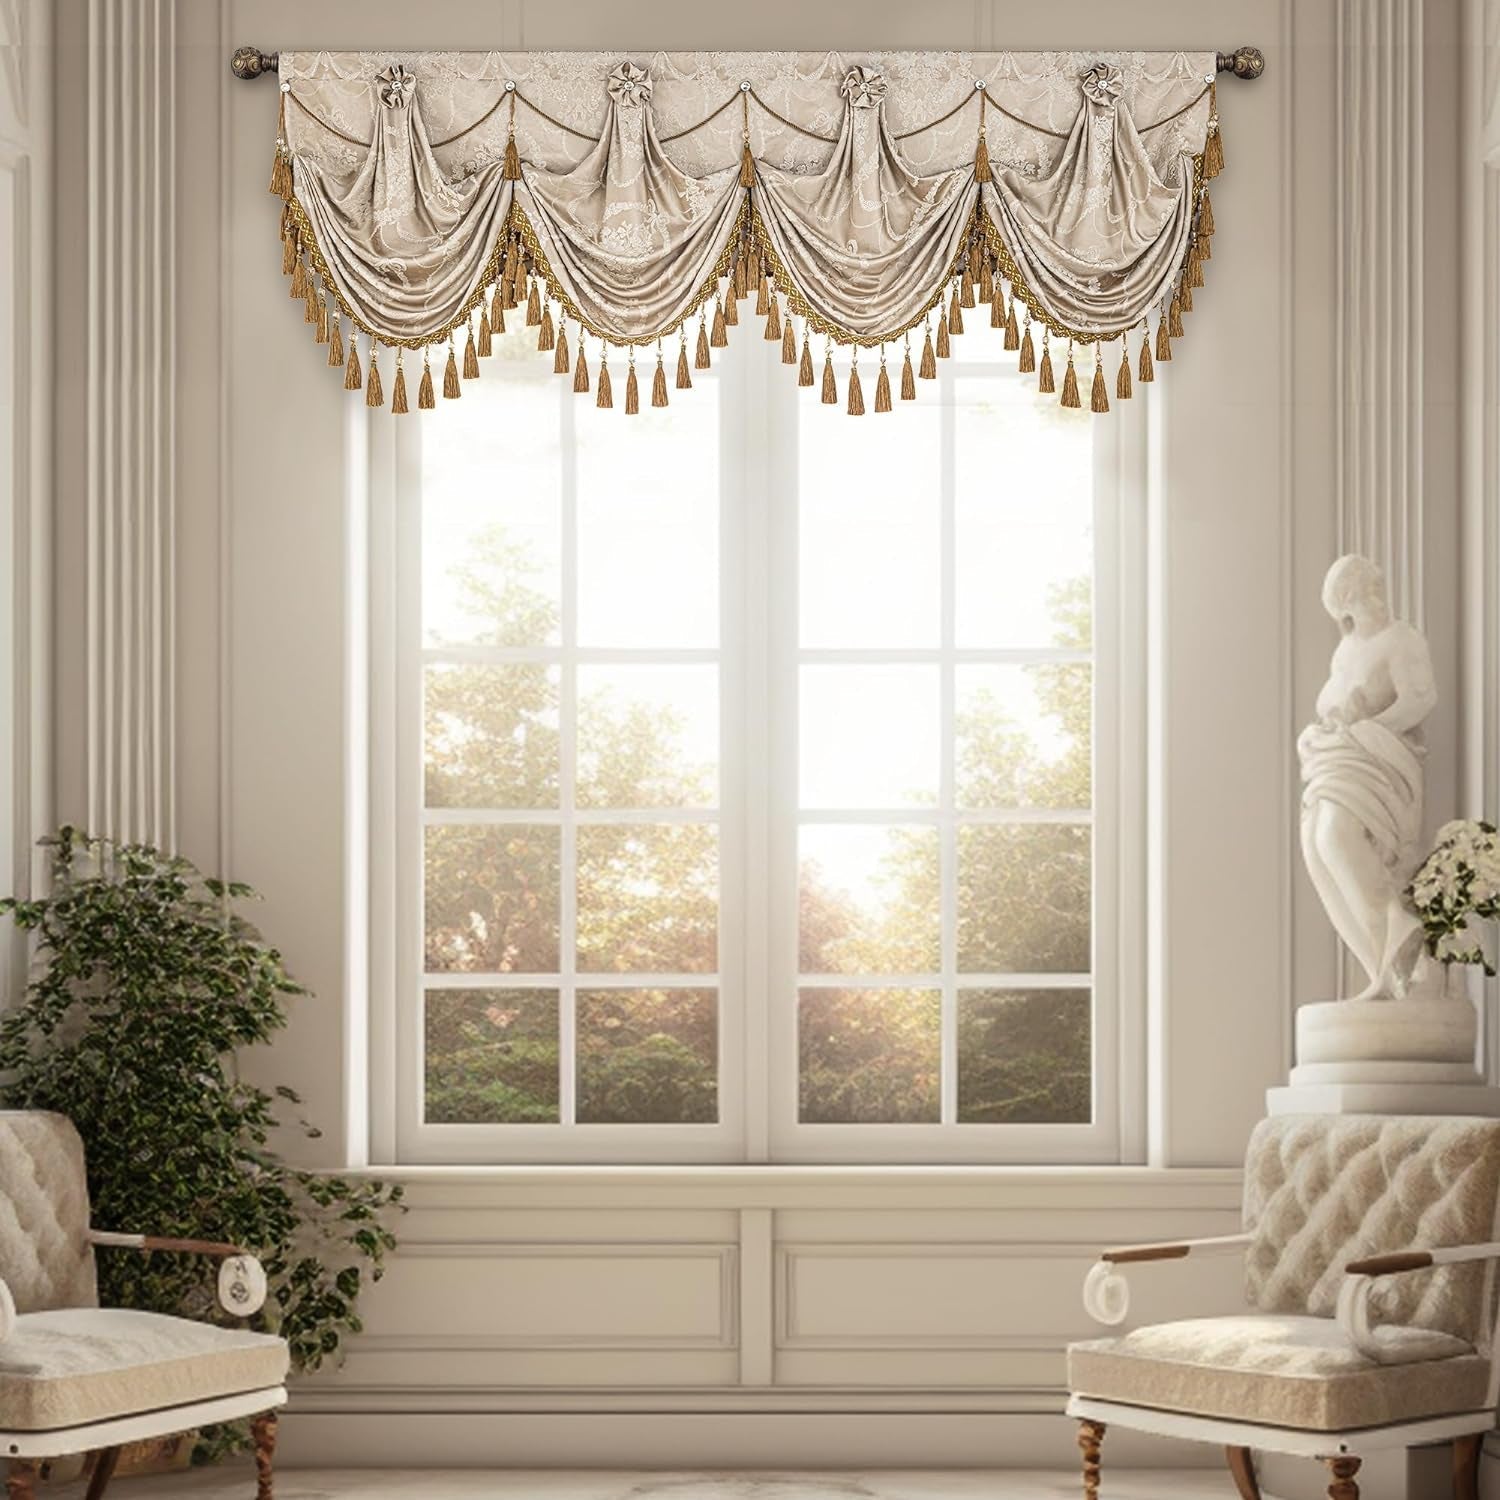 Loom and Mill Luxury Waterfall Valances for Windows, Elegant Jacquard Thick Swag Curtains Valance with Tassels for Living Room, Bedroom Party Banquet Decorations (Golden & Sand, W79 Inch, 1 Panel)